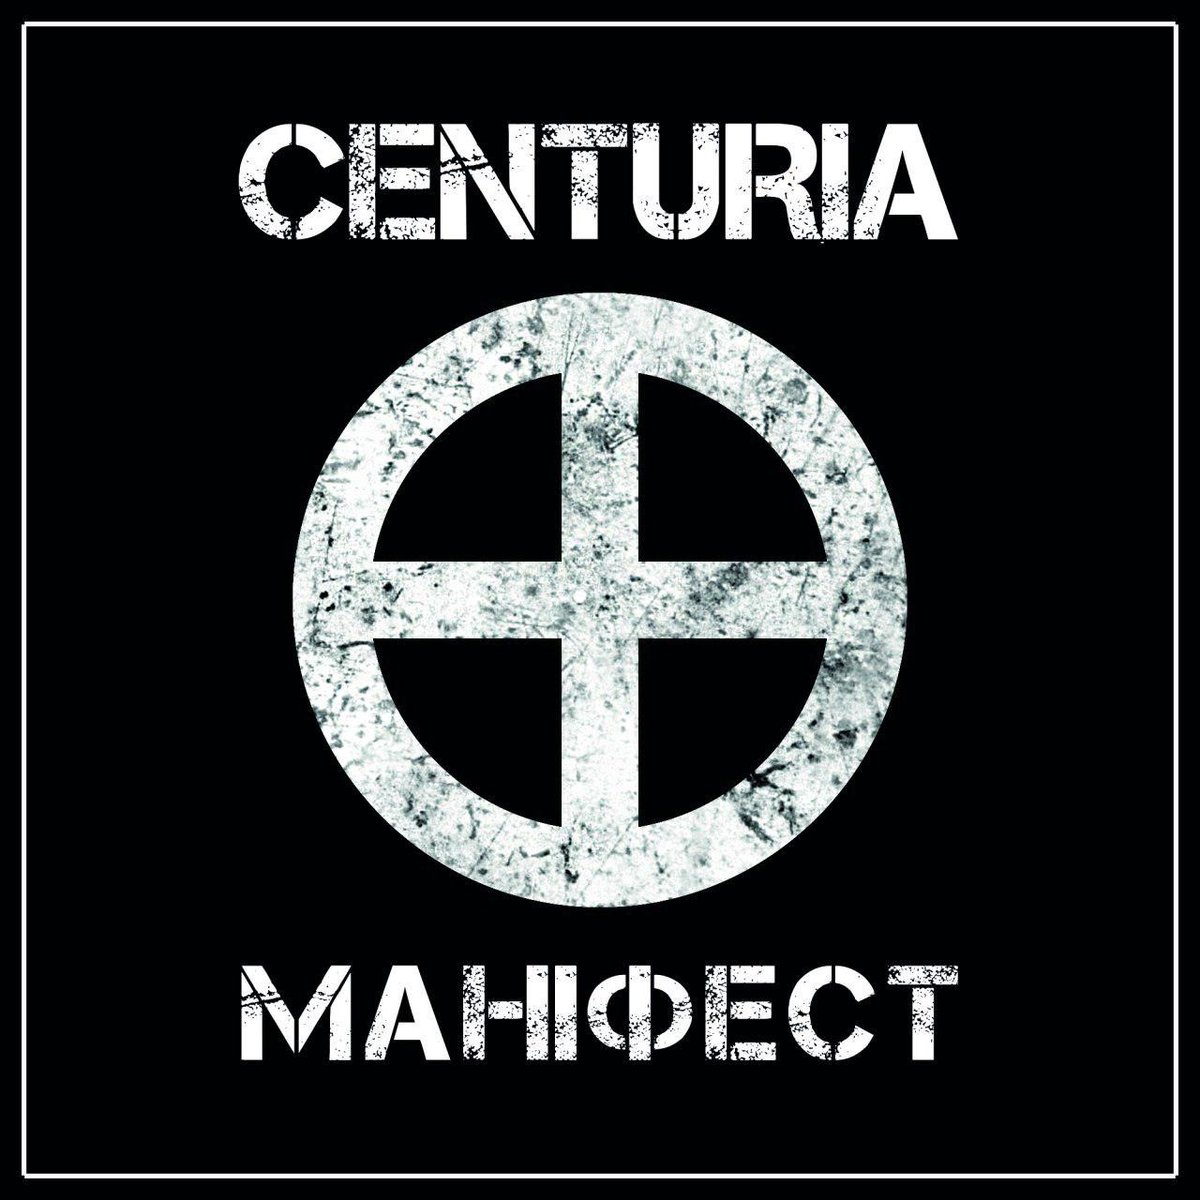 The public roll-out of the "Centuria" group is notable because that supposedly new group shares the name with an apparently Azov-linked group of young military officers dedicated to infiltrating Ukraine's Armed Forces, building far right's clout there. The latter Centuria's logos